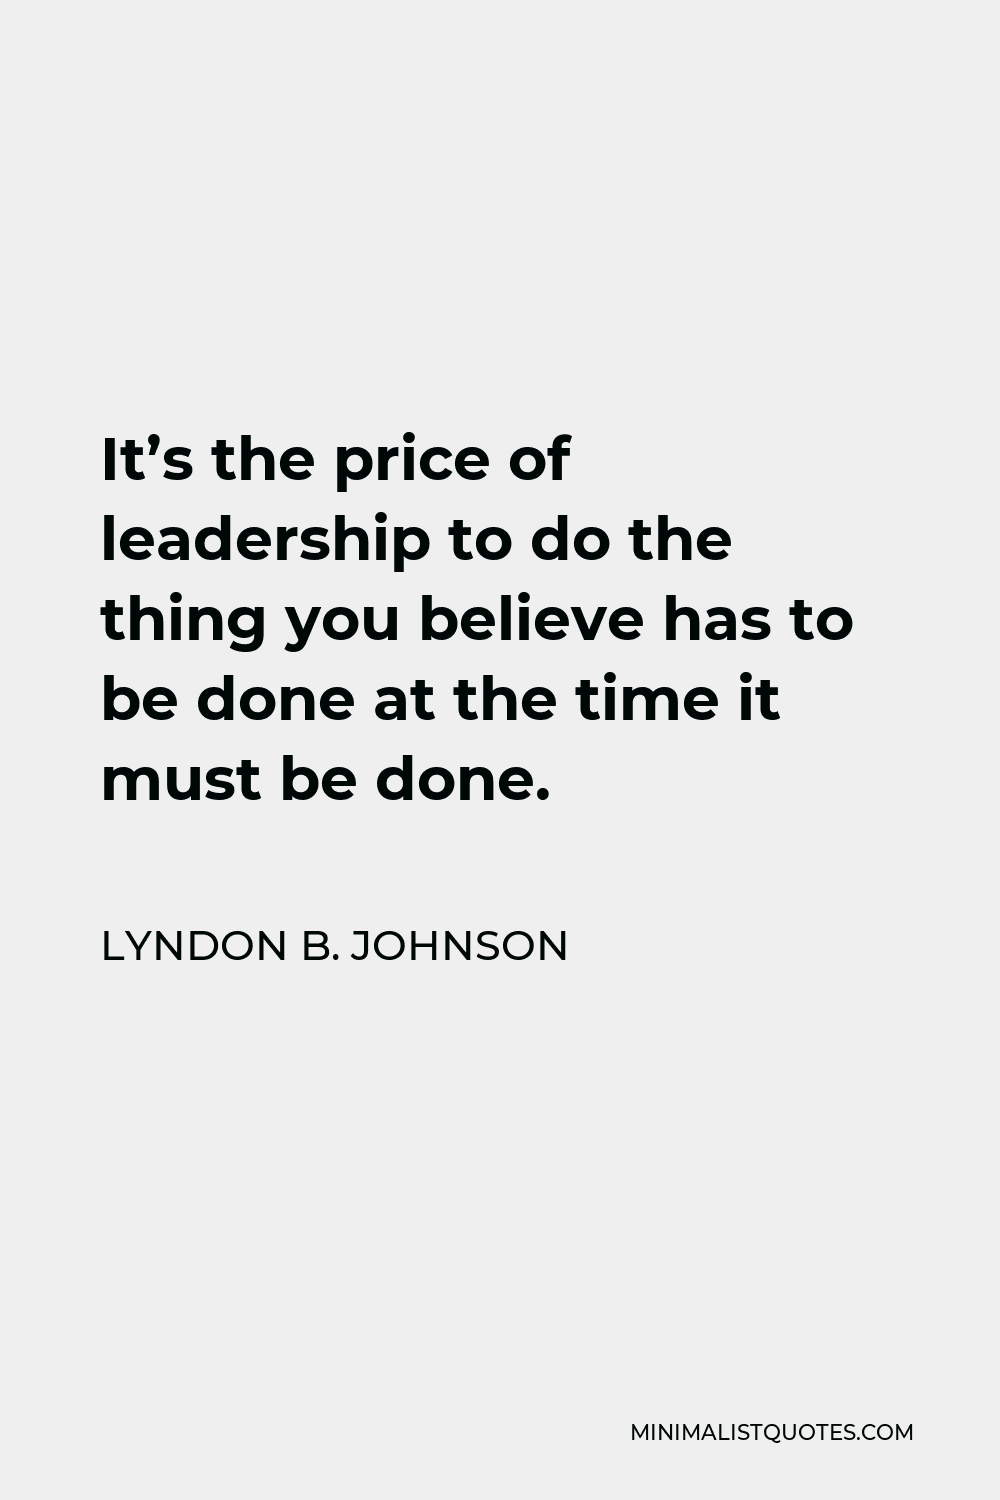 Lyndon B. Johnson Quote - It’s the price of leadership to do the thing you believe has to be done at the time it must be done.